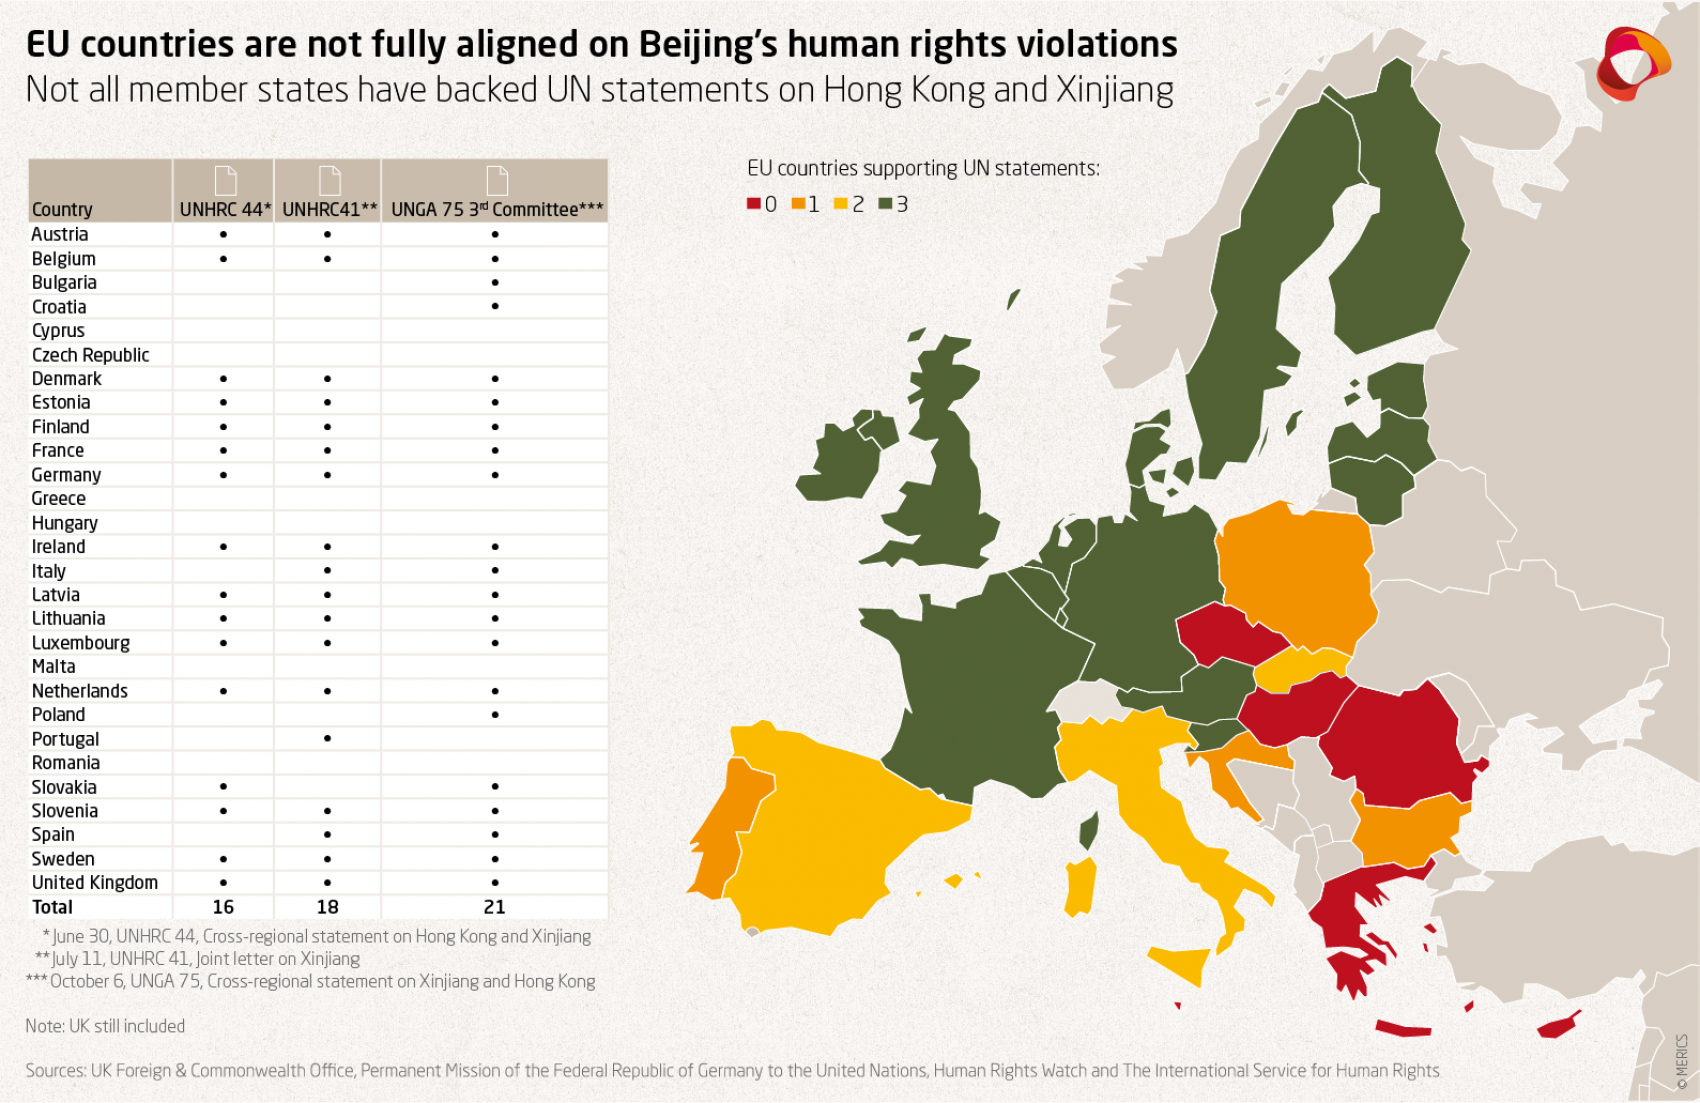 Map showing EU member states support for UN statements on Beijing's human rights violations